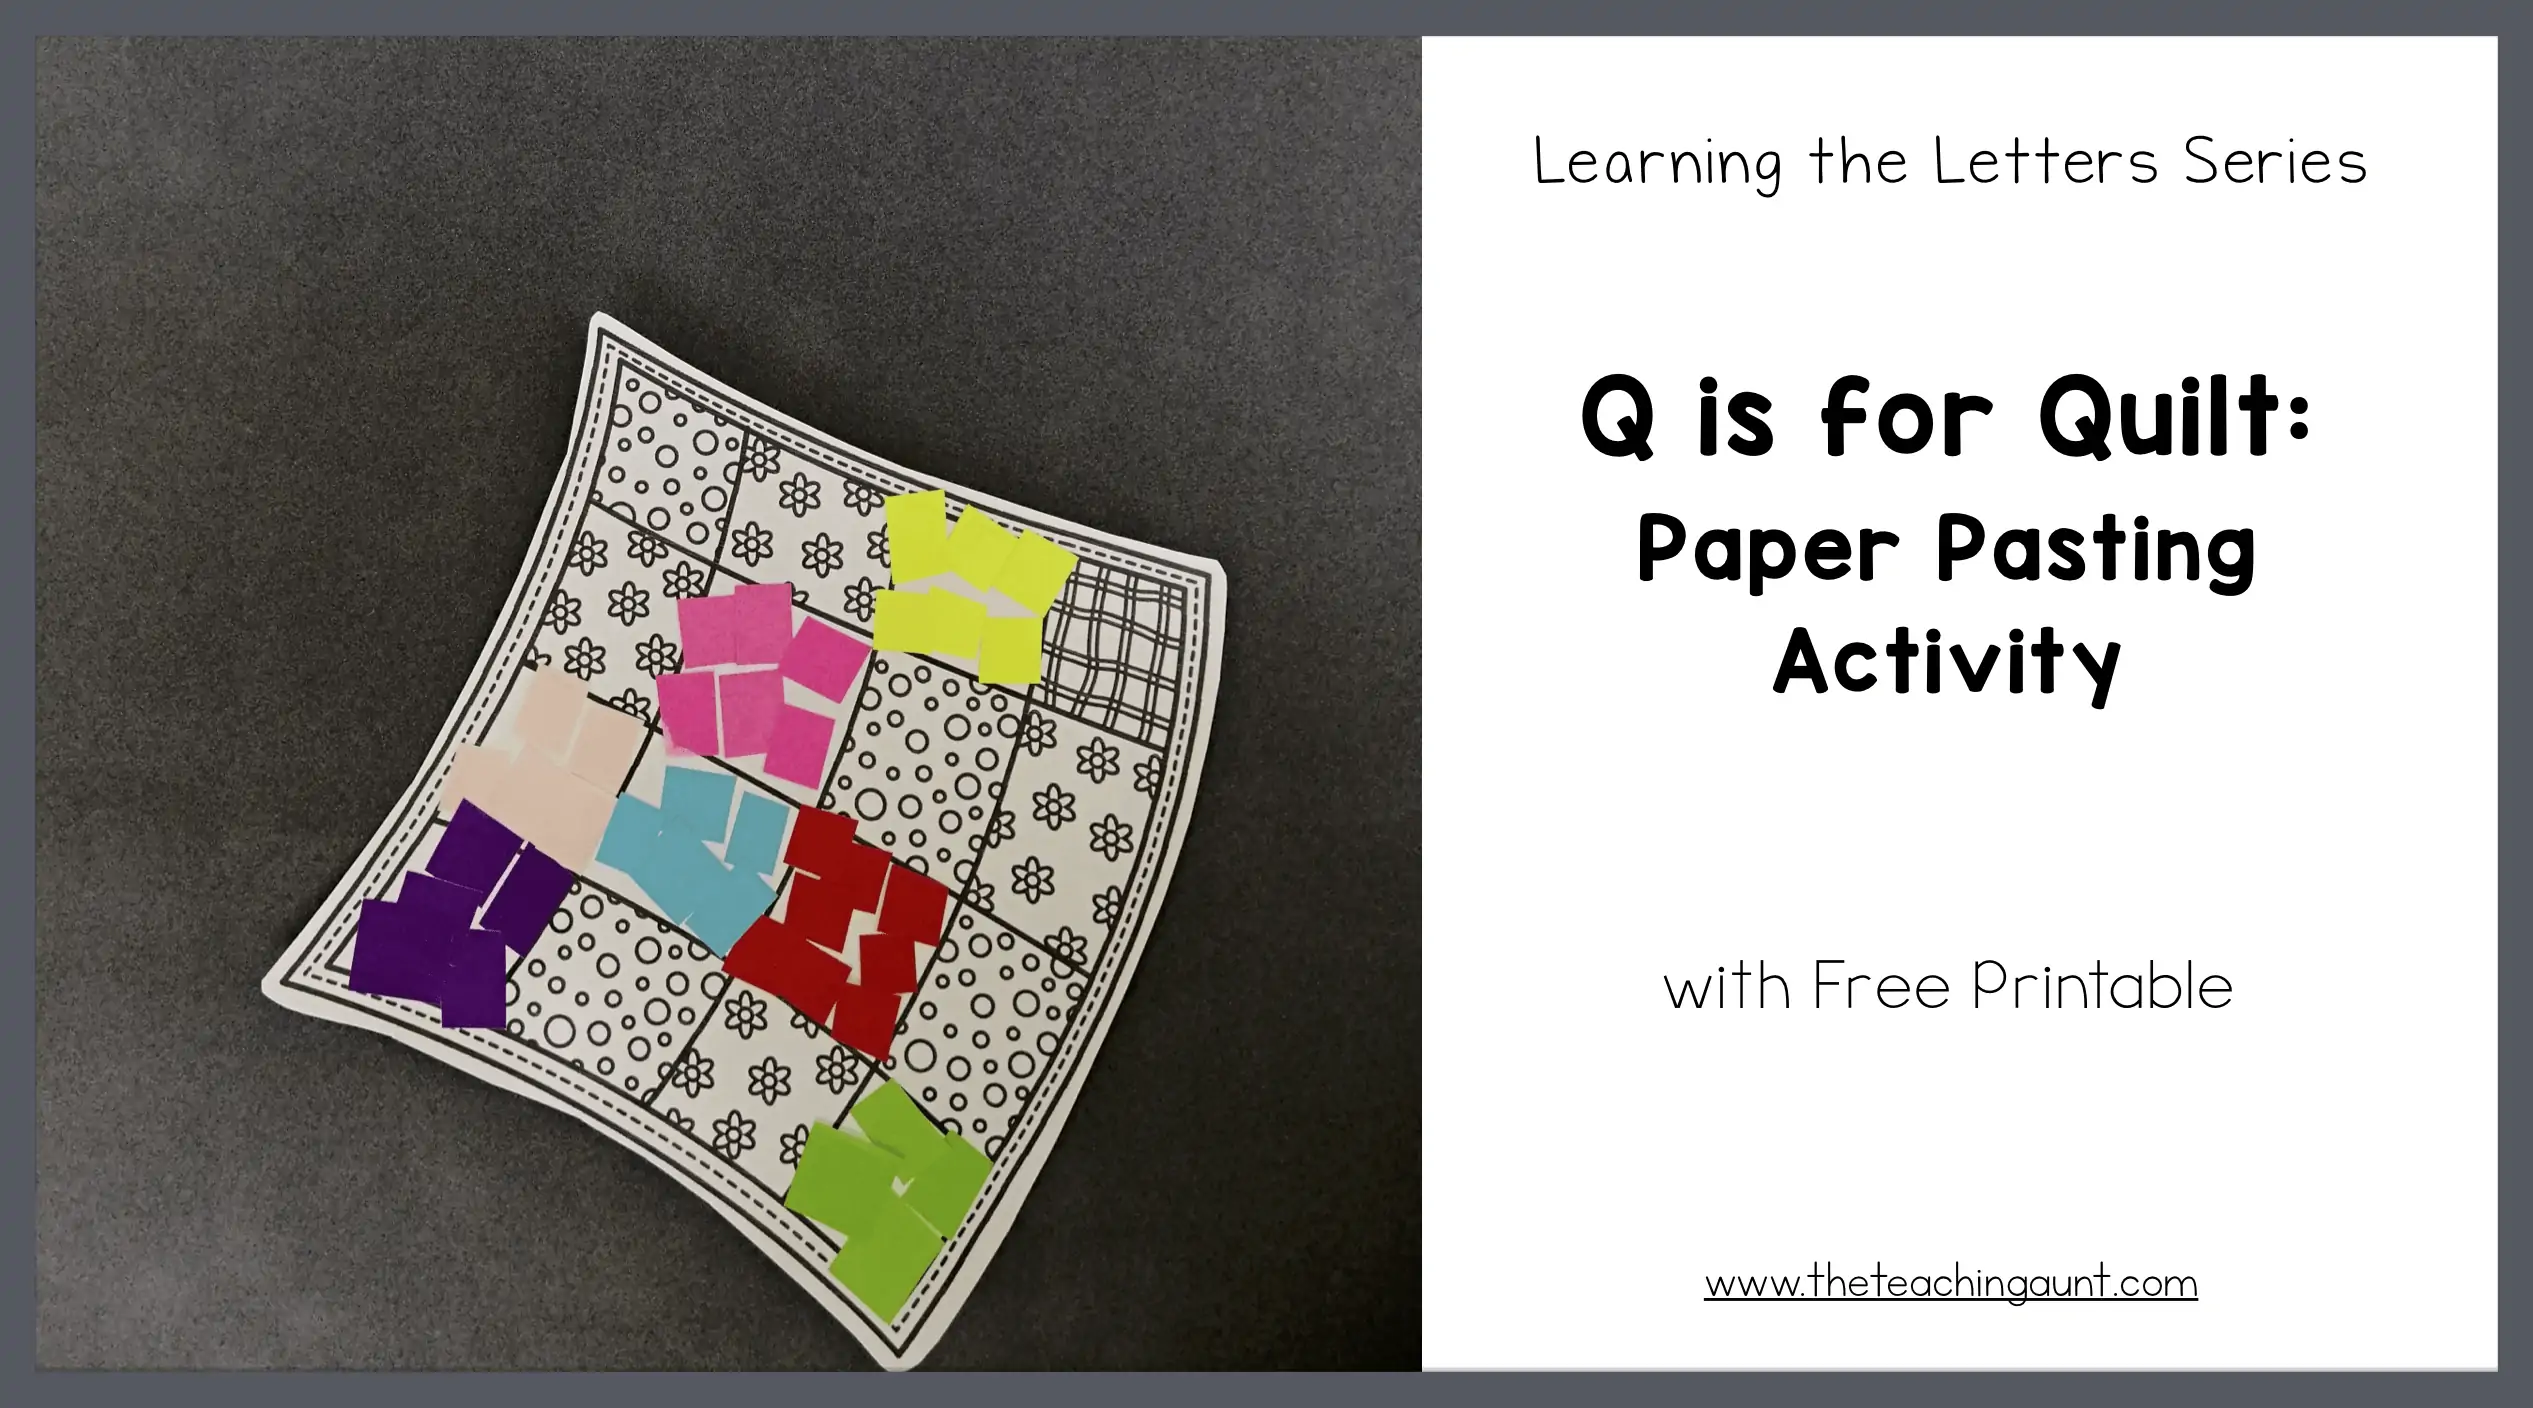 Q is for quilt paper pasting activity